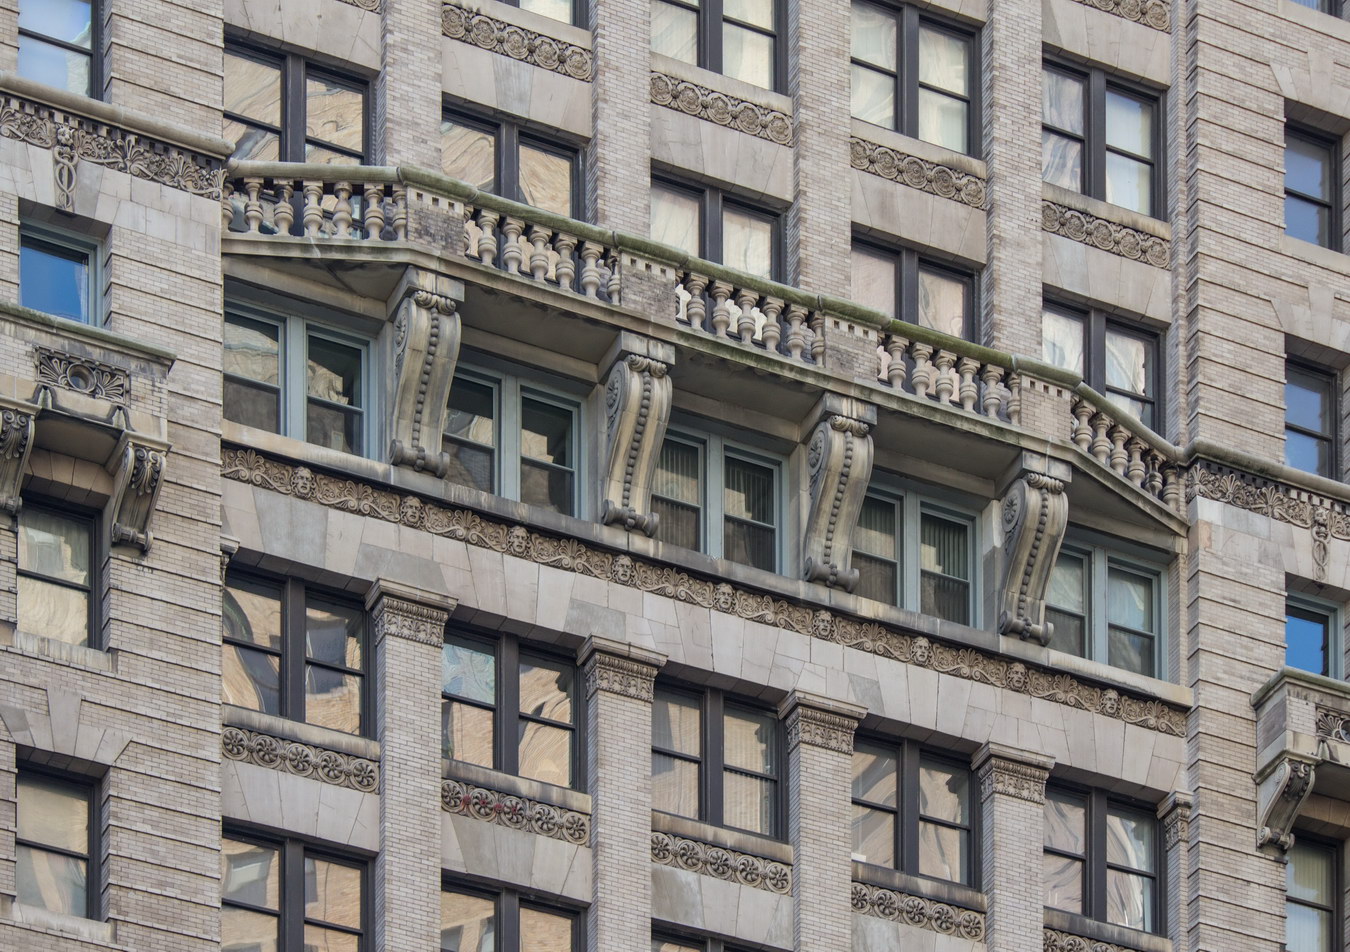 The balconies are strictly decorative.